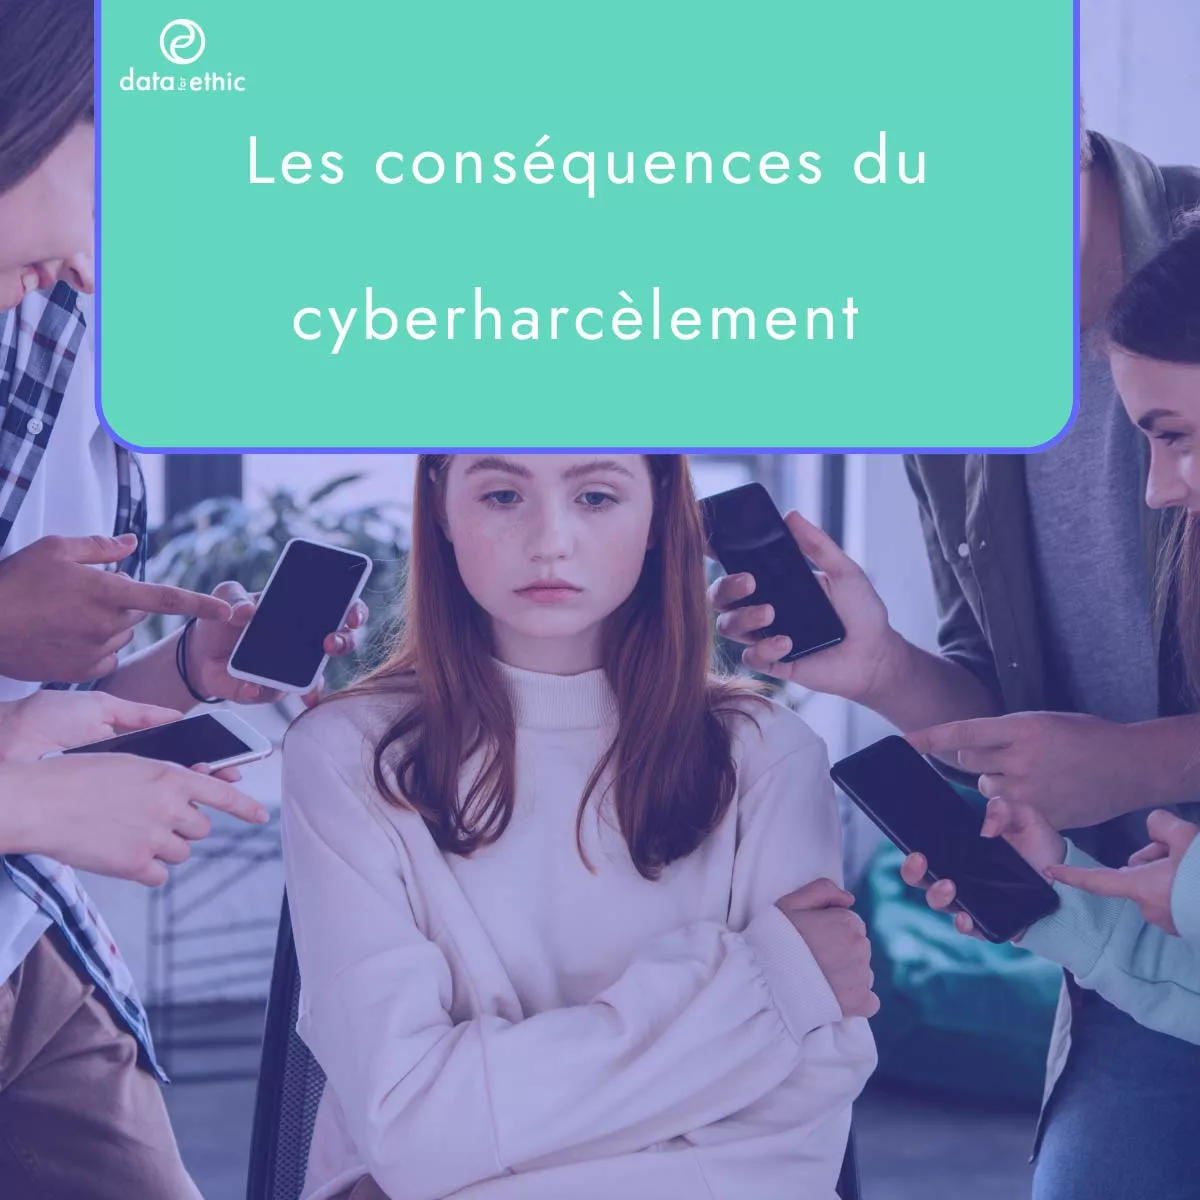 cyberharcelement-consequences-solutions-dataforethic